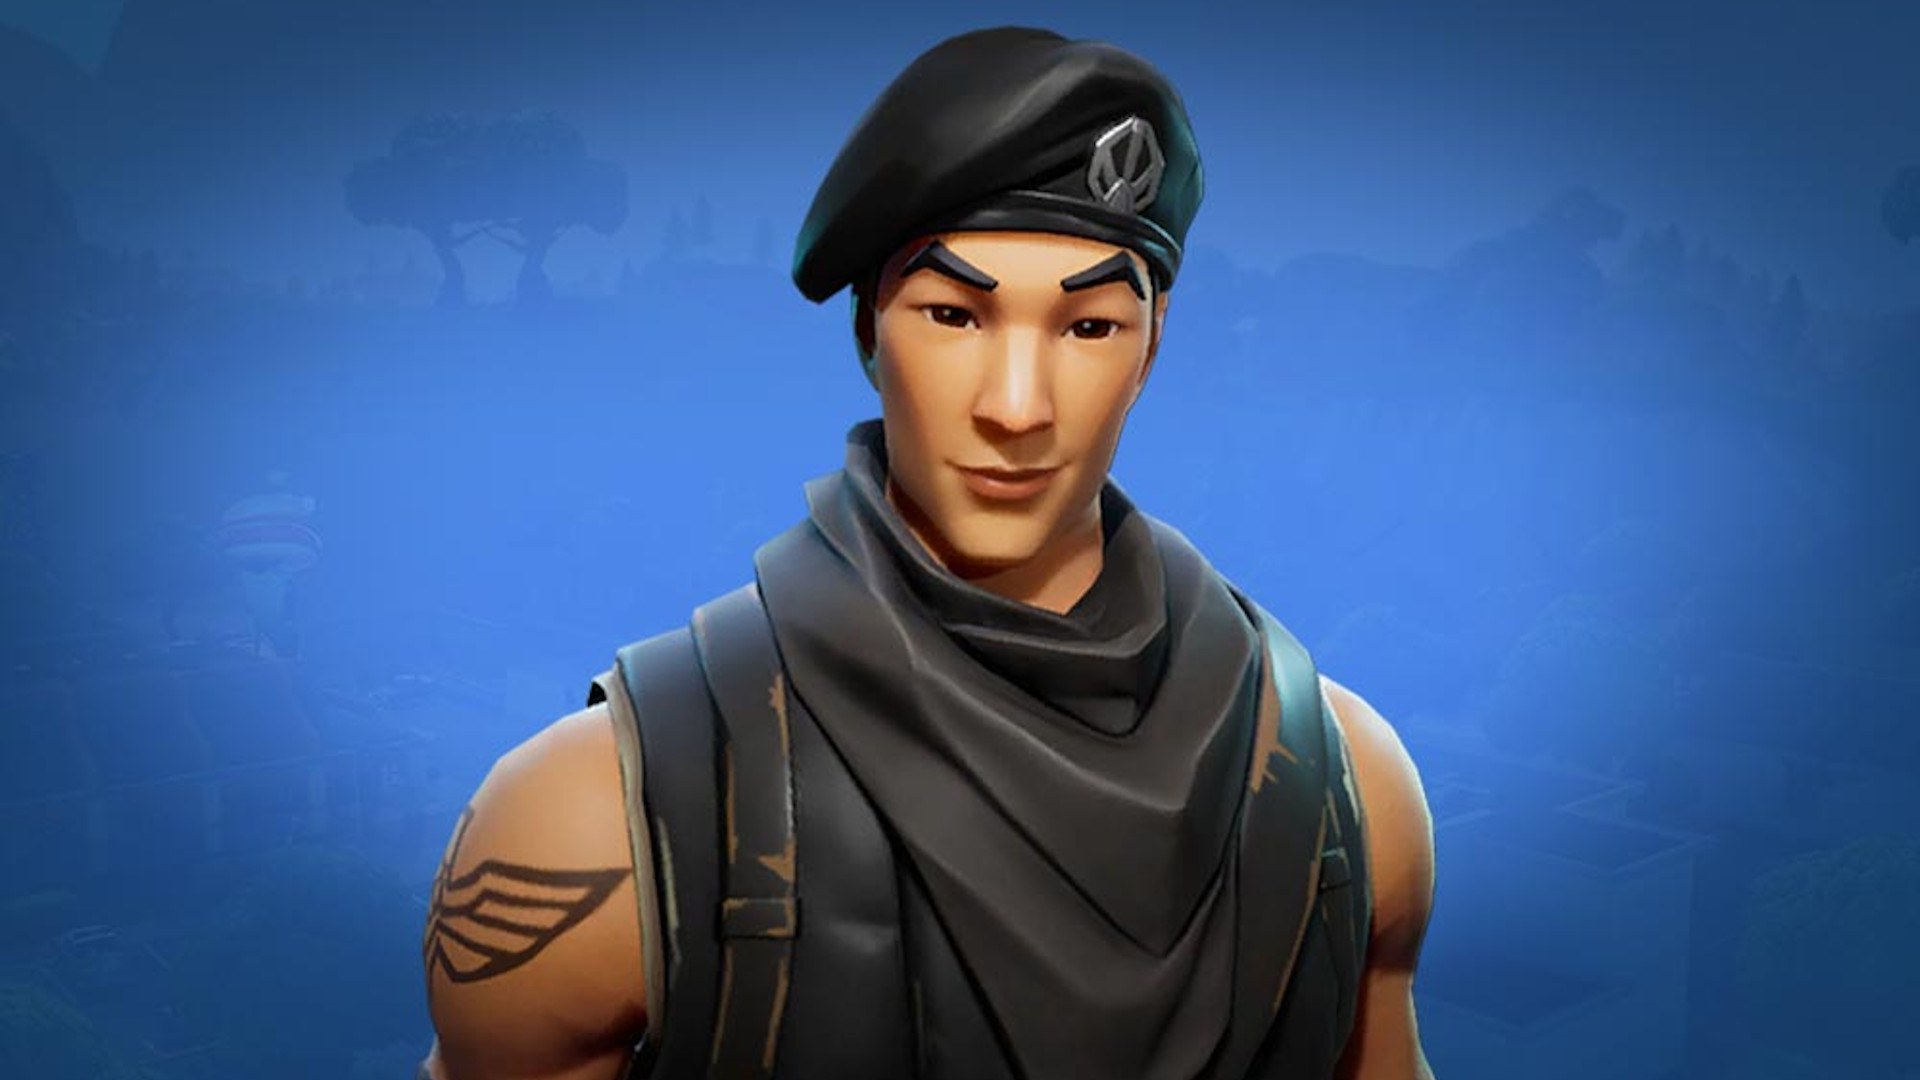 Rarest Fortnite skins: The Special Forces skin smirking at the camera.